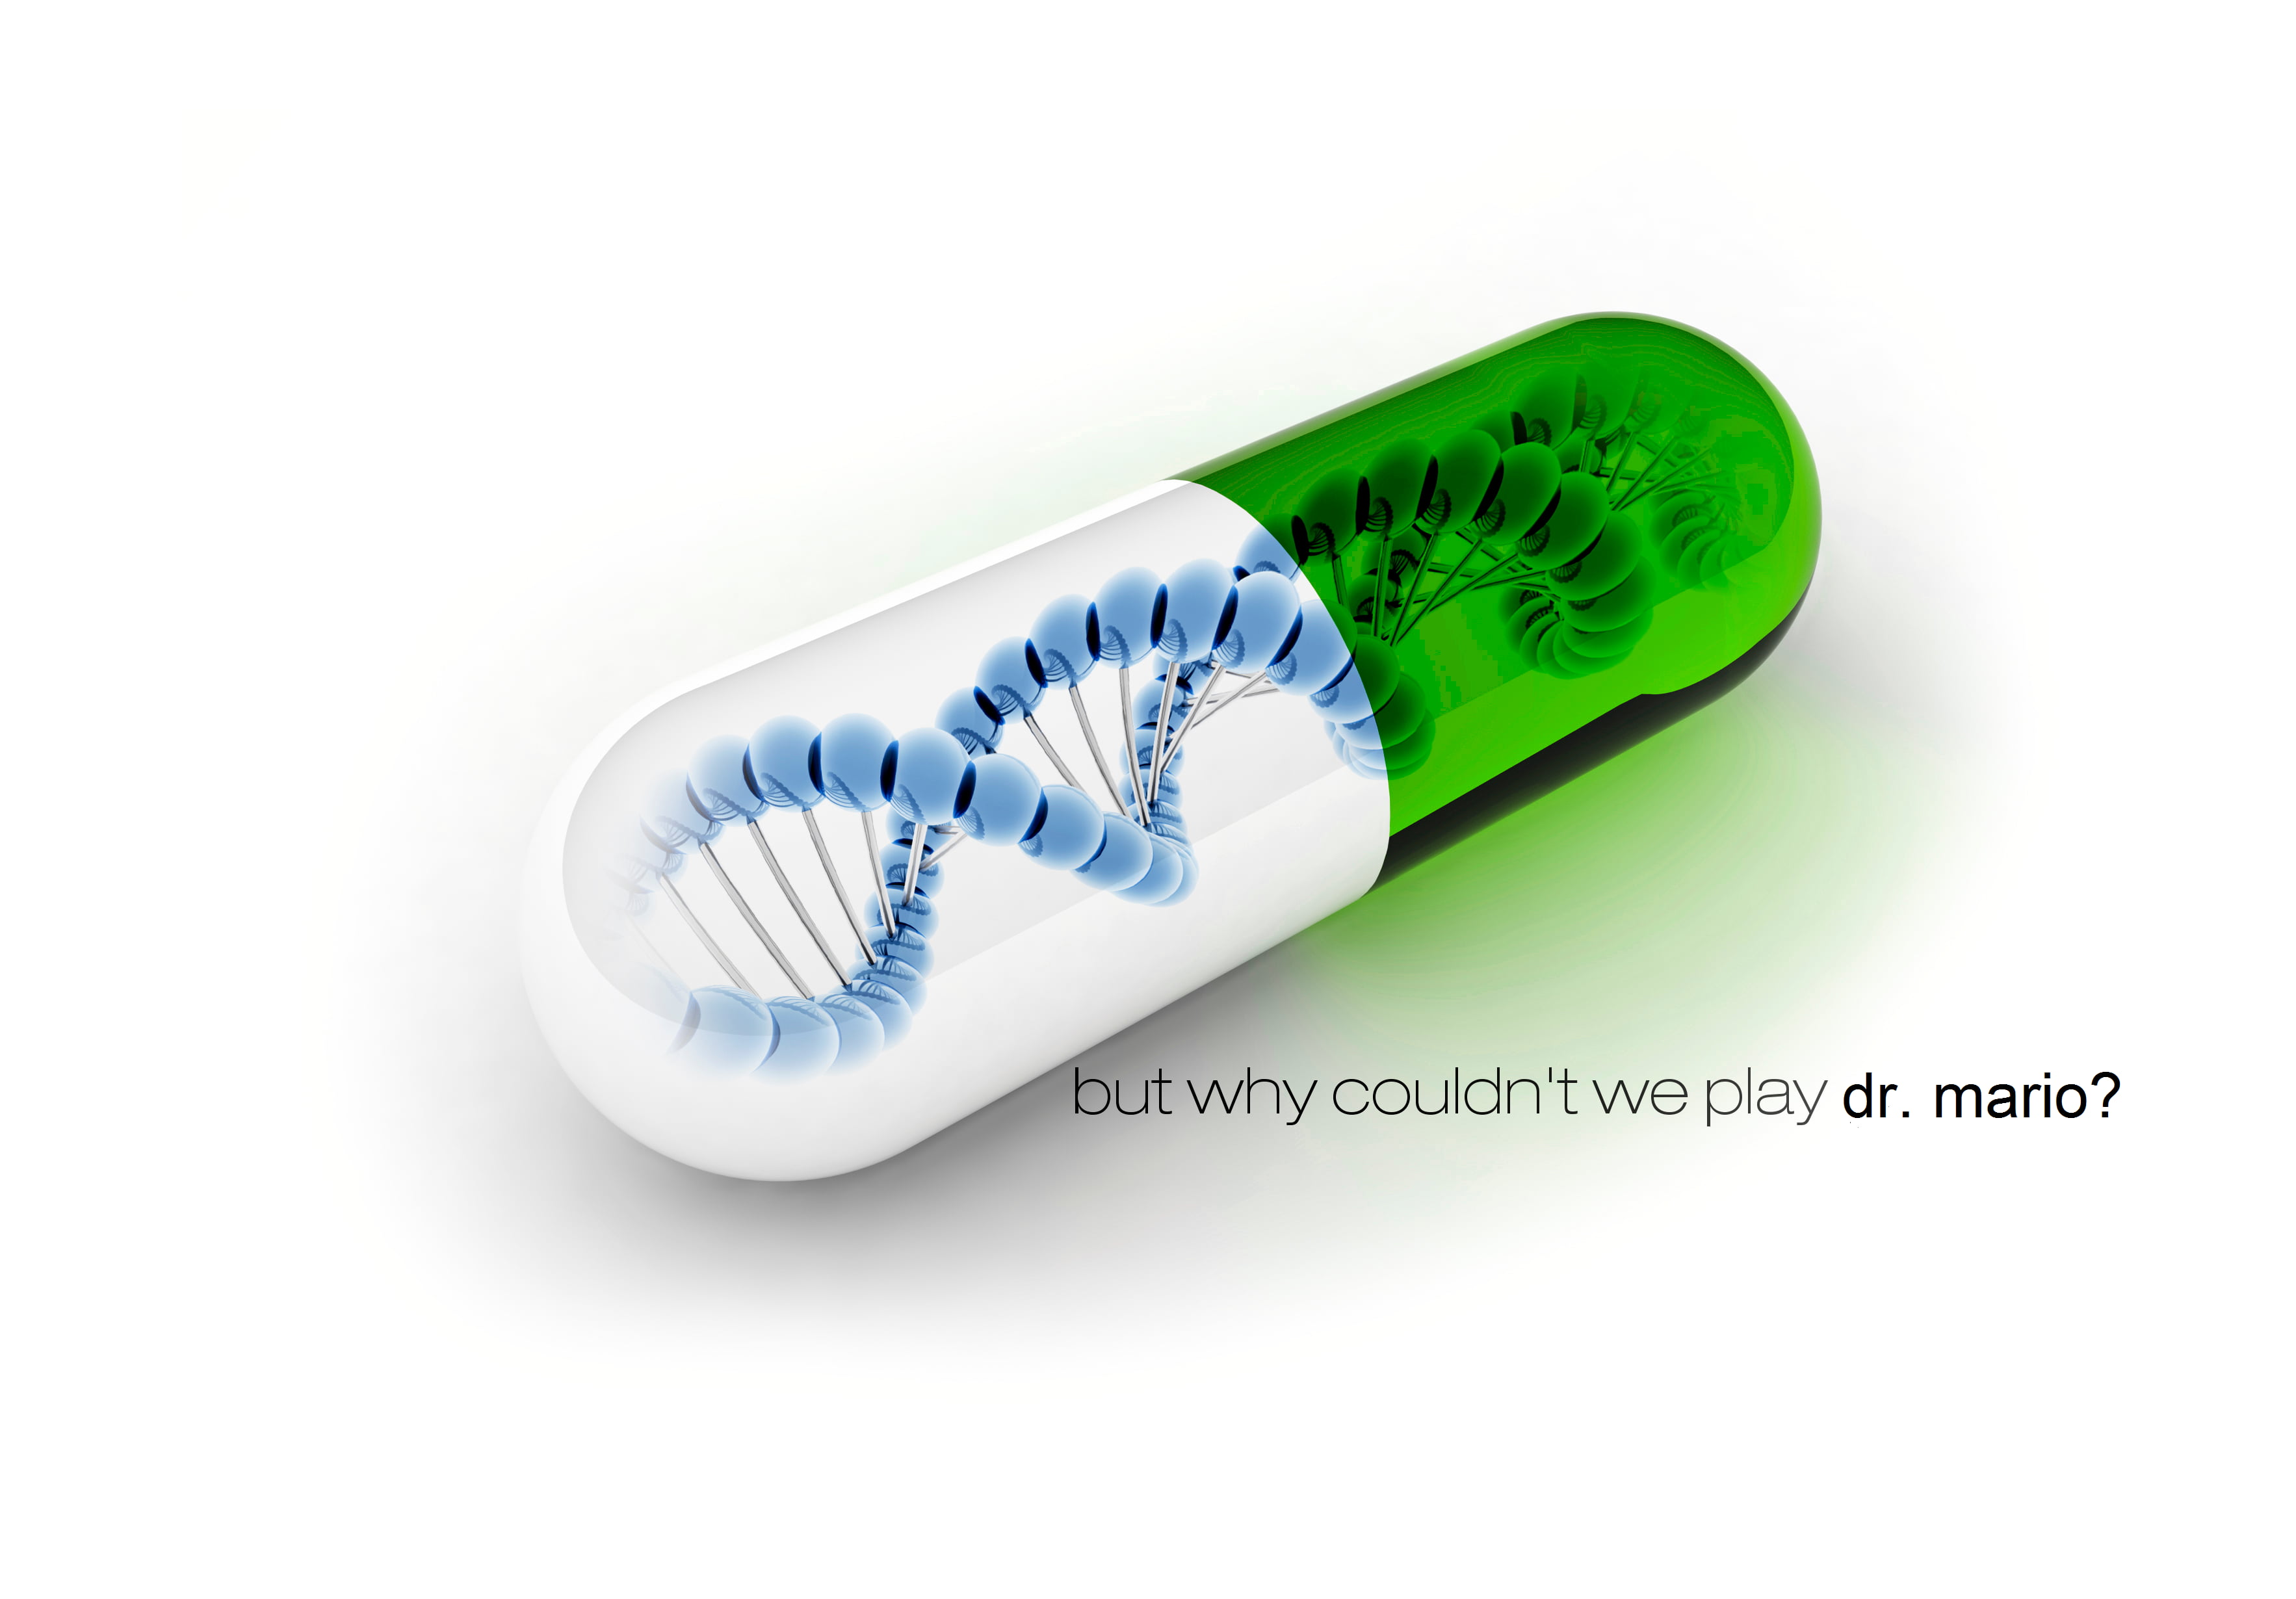 white and green medicine pill, digital art, simple background, typography, science